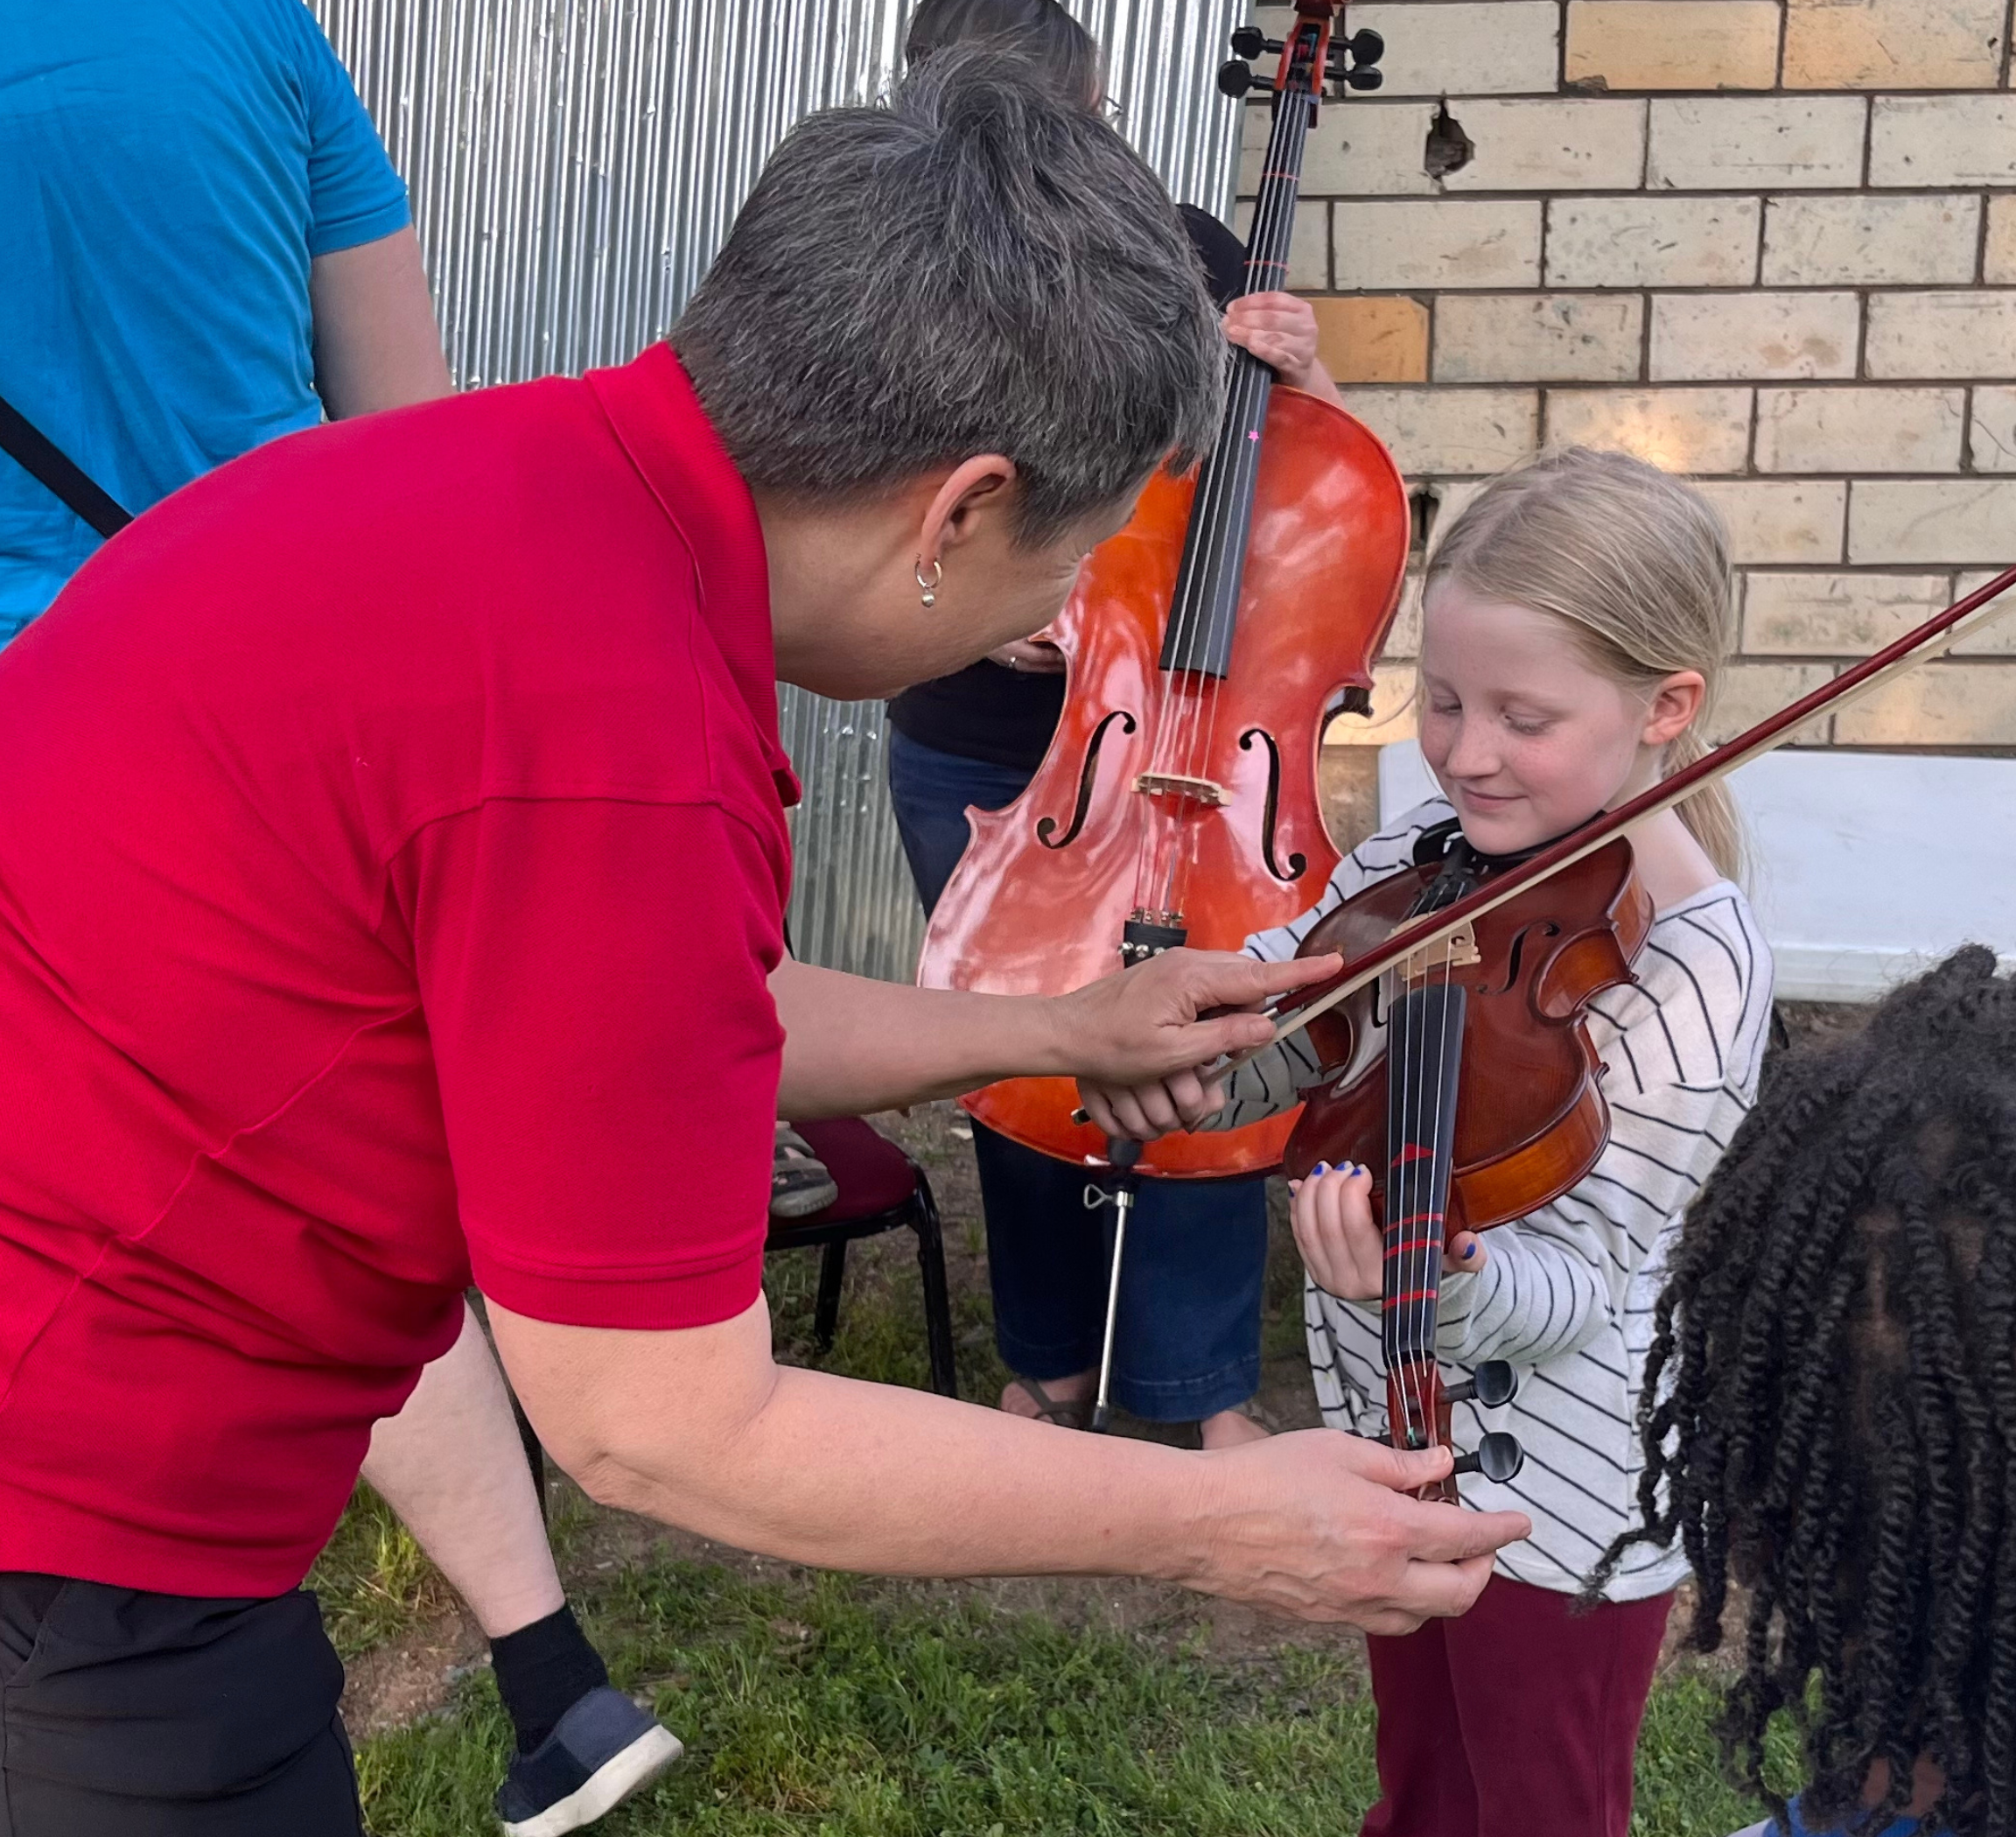 woman in red shirt assists young child with a violin